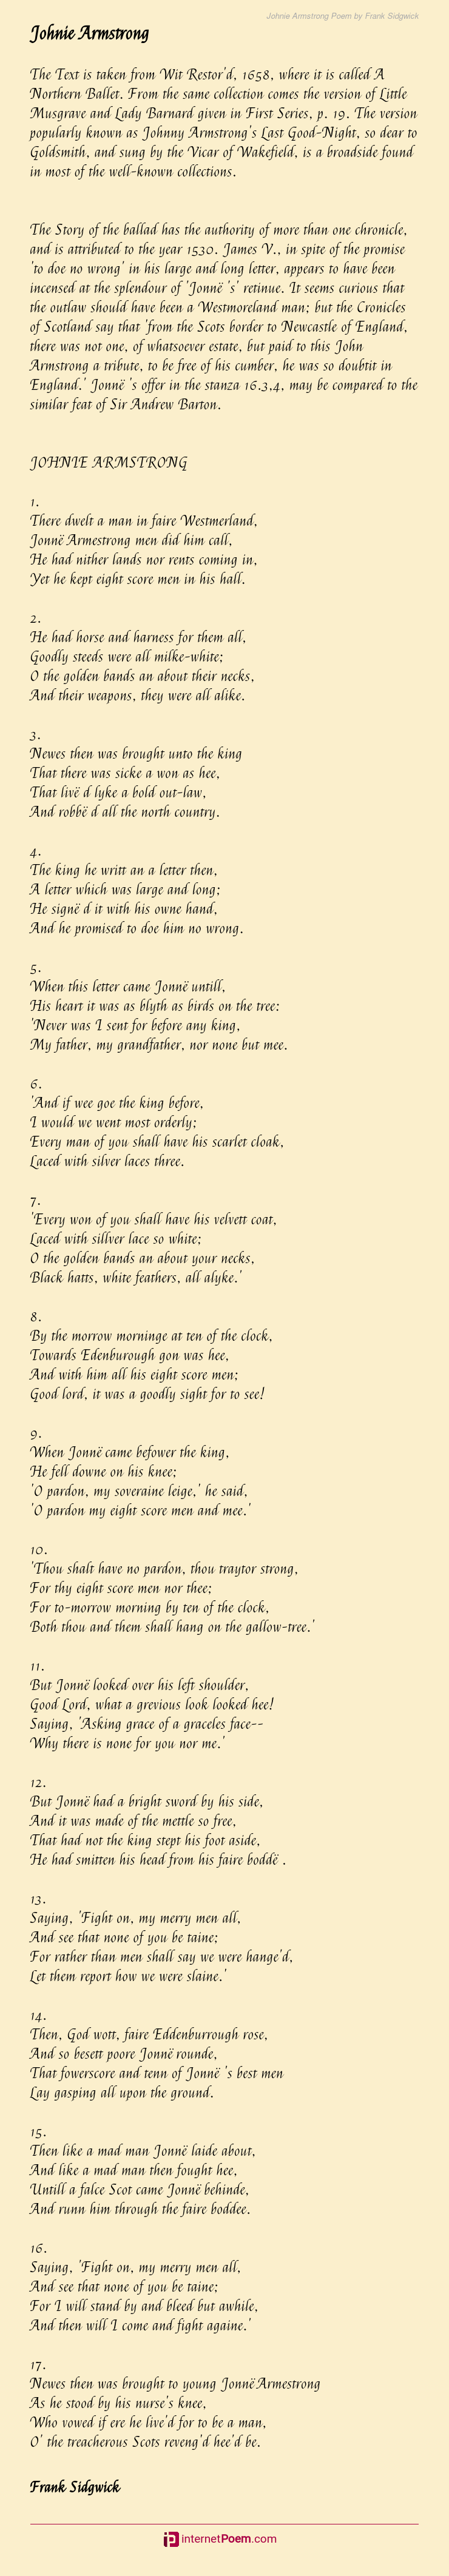 Johnie Armstrong Poem By Frank Sidgwick 0933